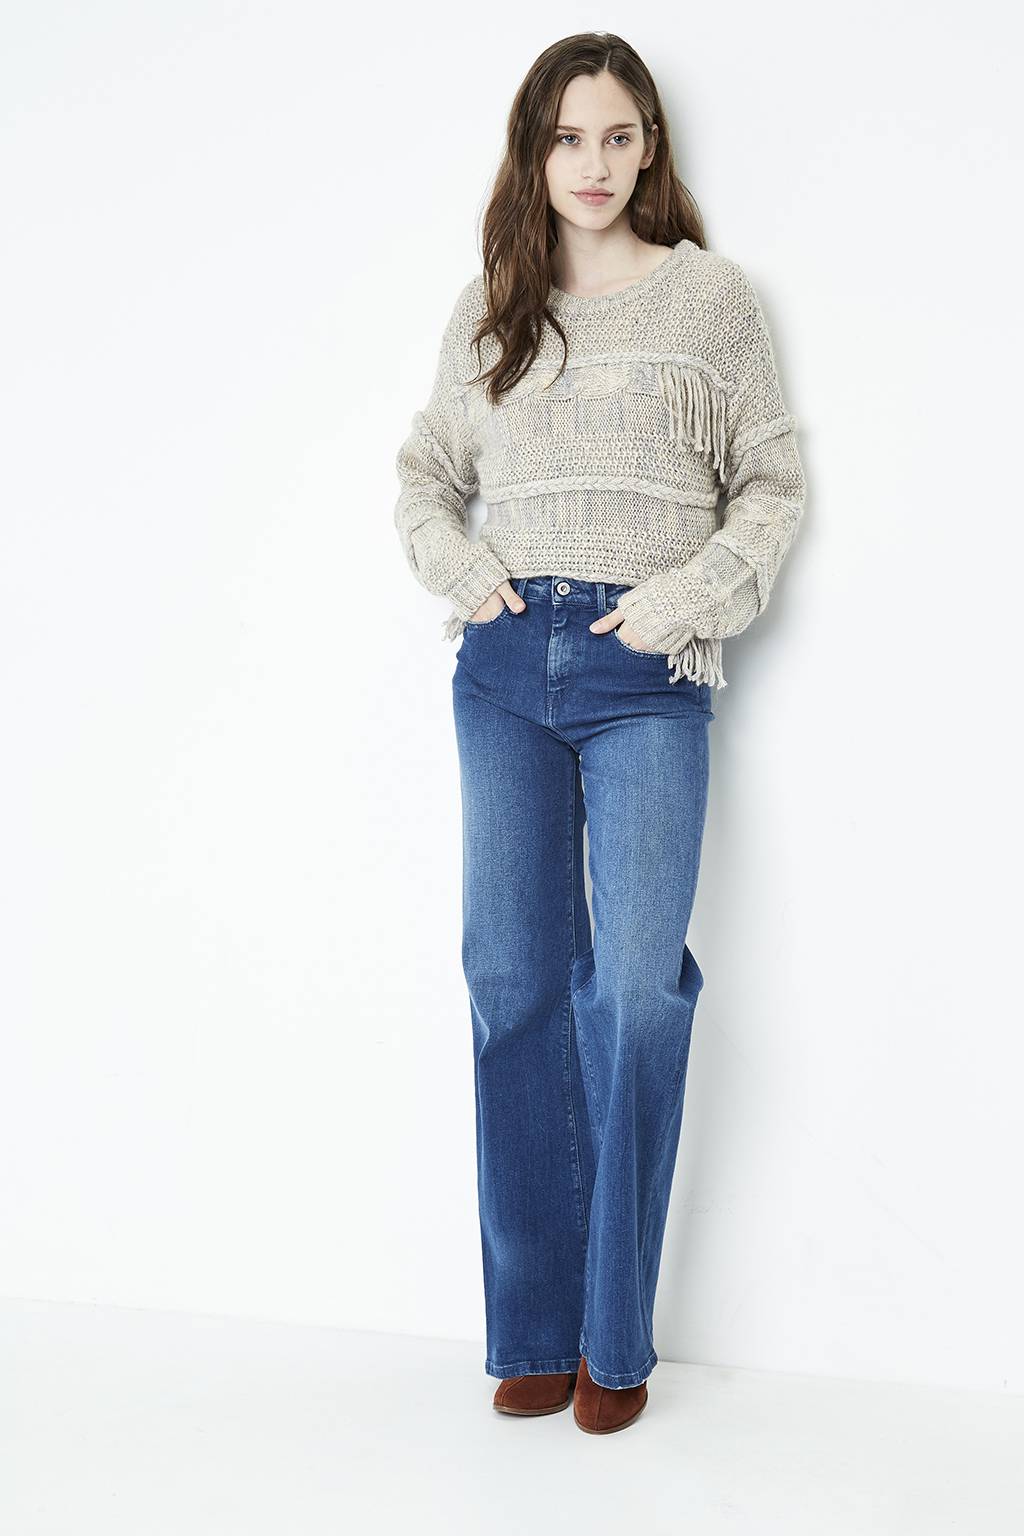 Pepe Jeans jean flare